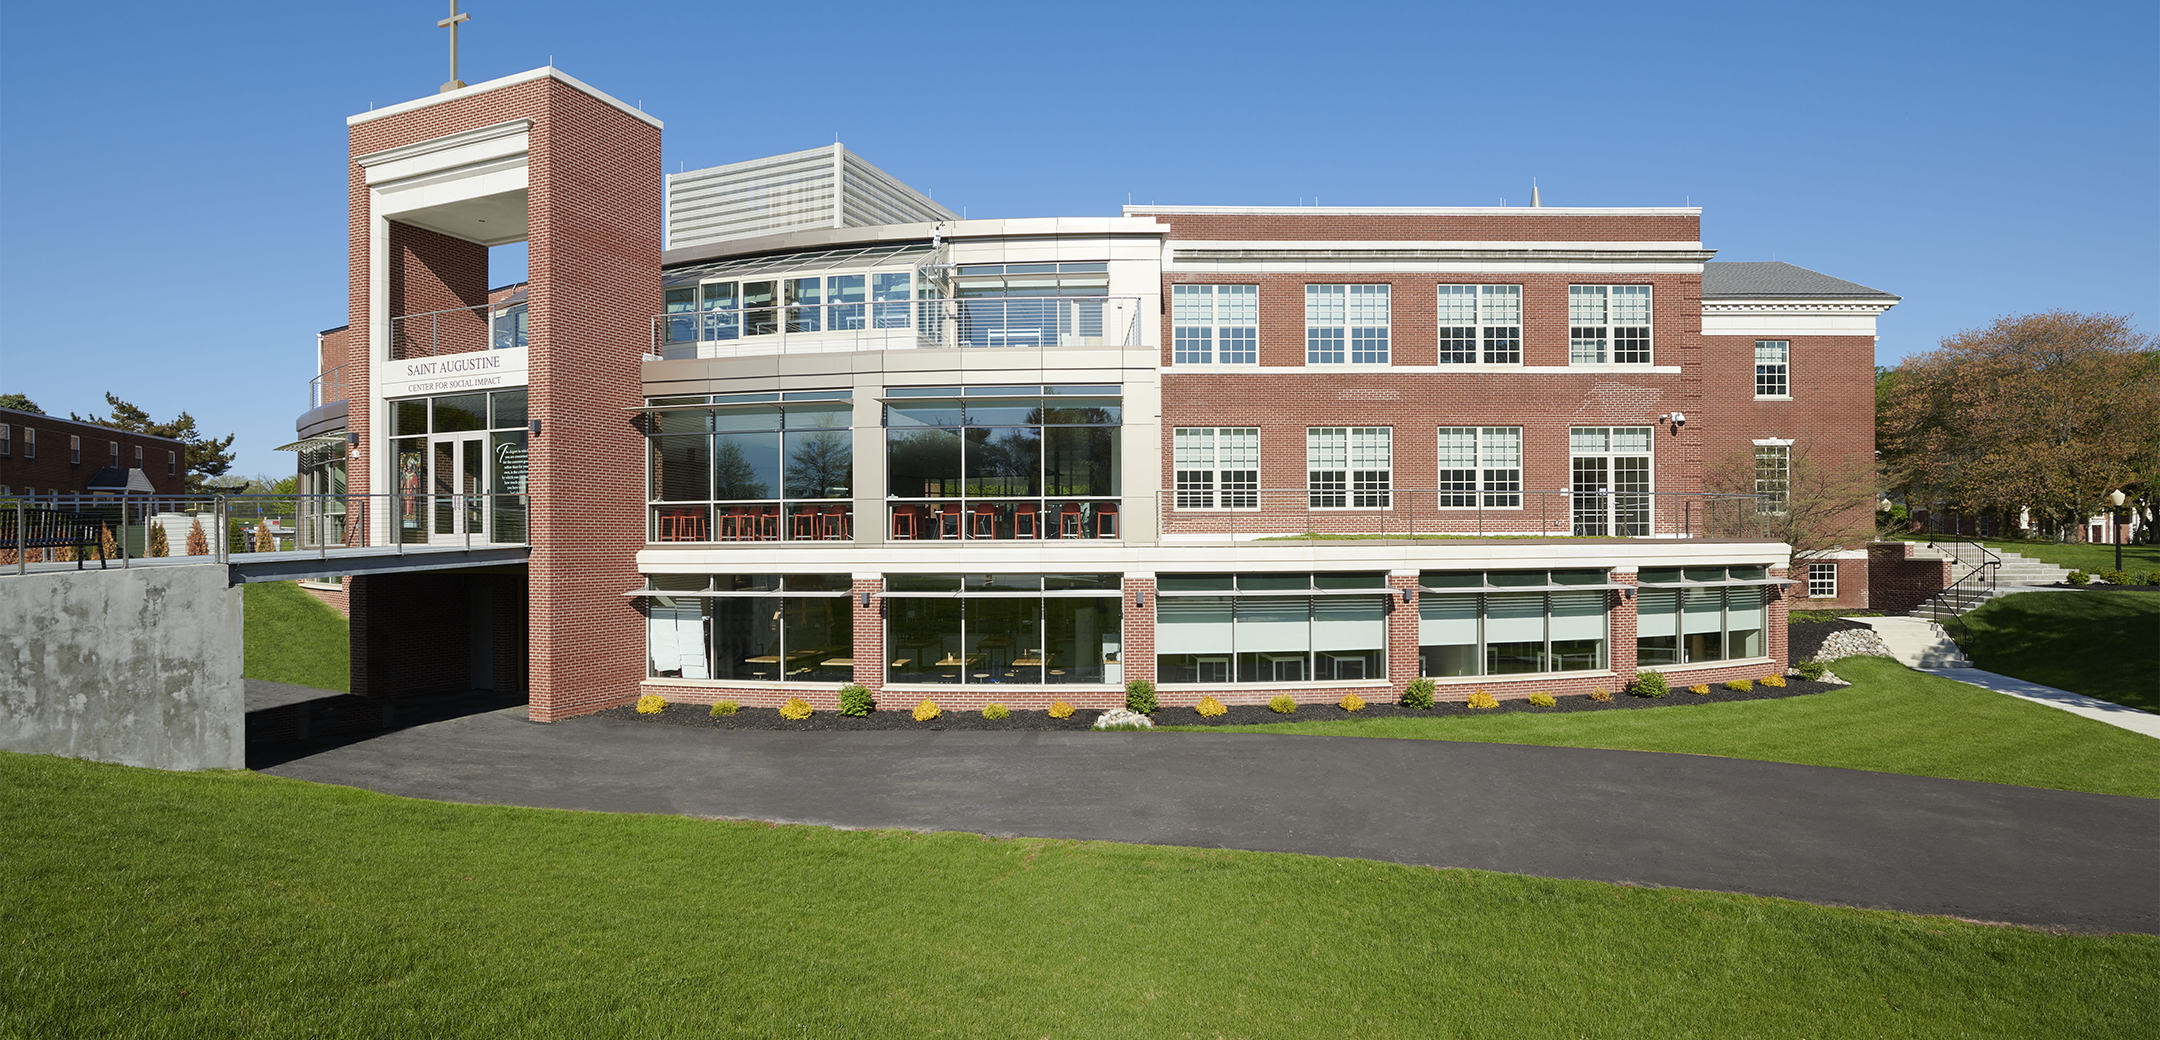 The exterior of Malvern Prep 3-story building showcasing the bridge leading to the front entrance on the second floor over the driveway on the ground floor.